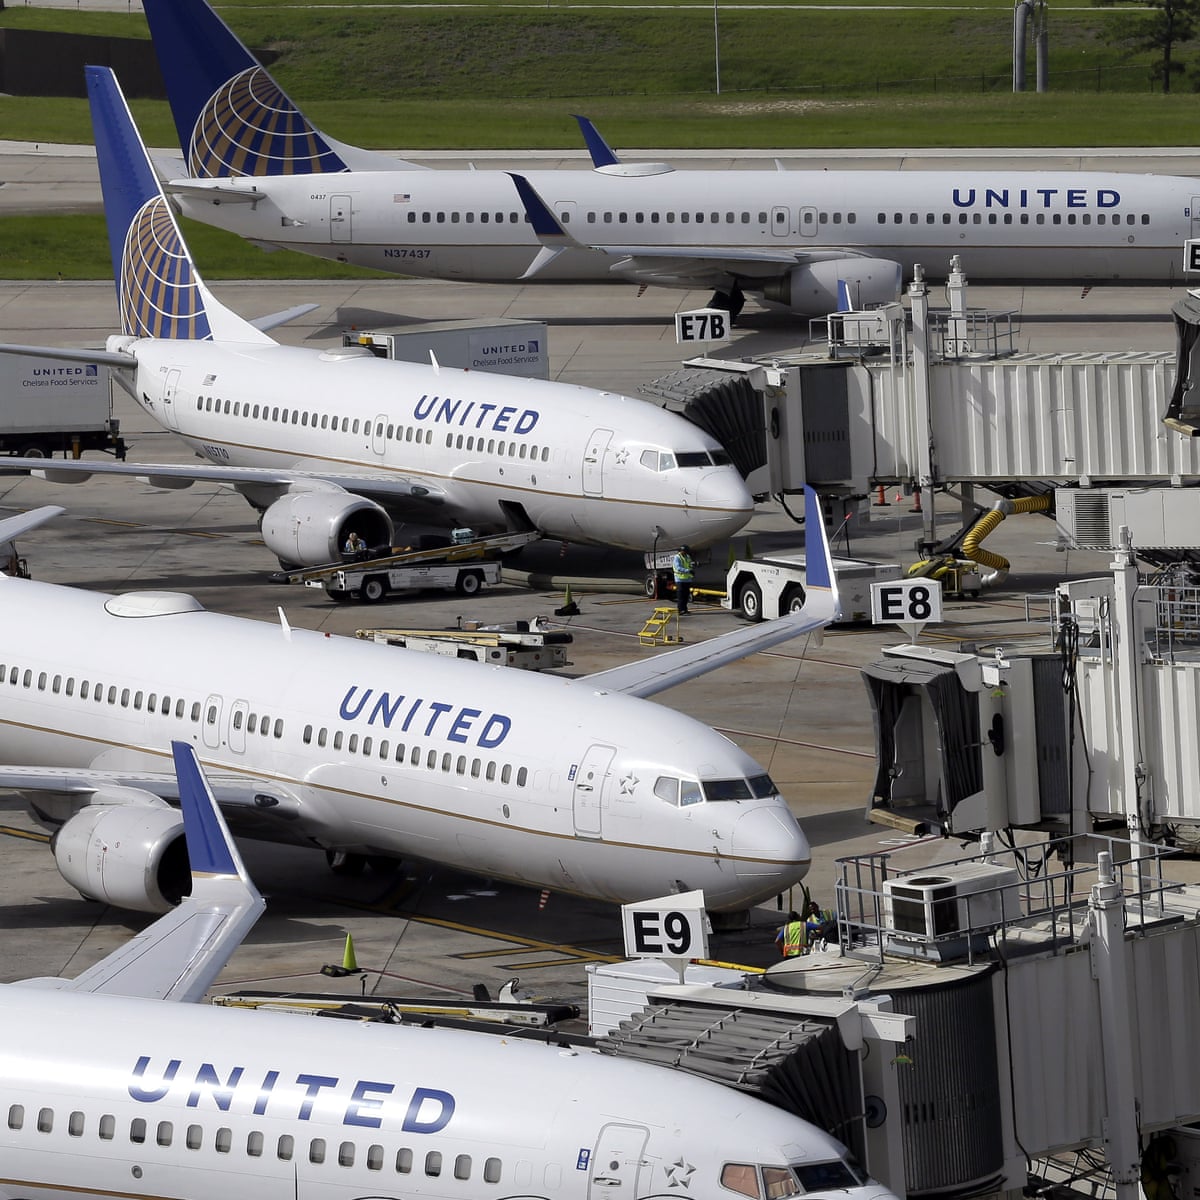 United Airlines defends gate decision to bar girls wearing leggings